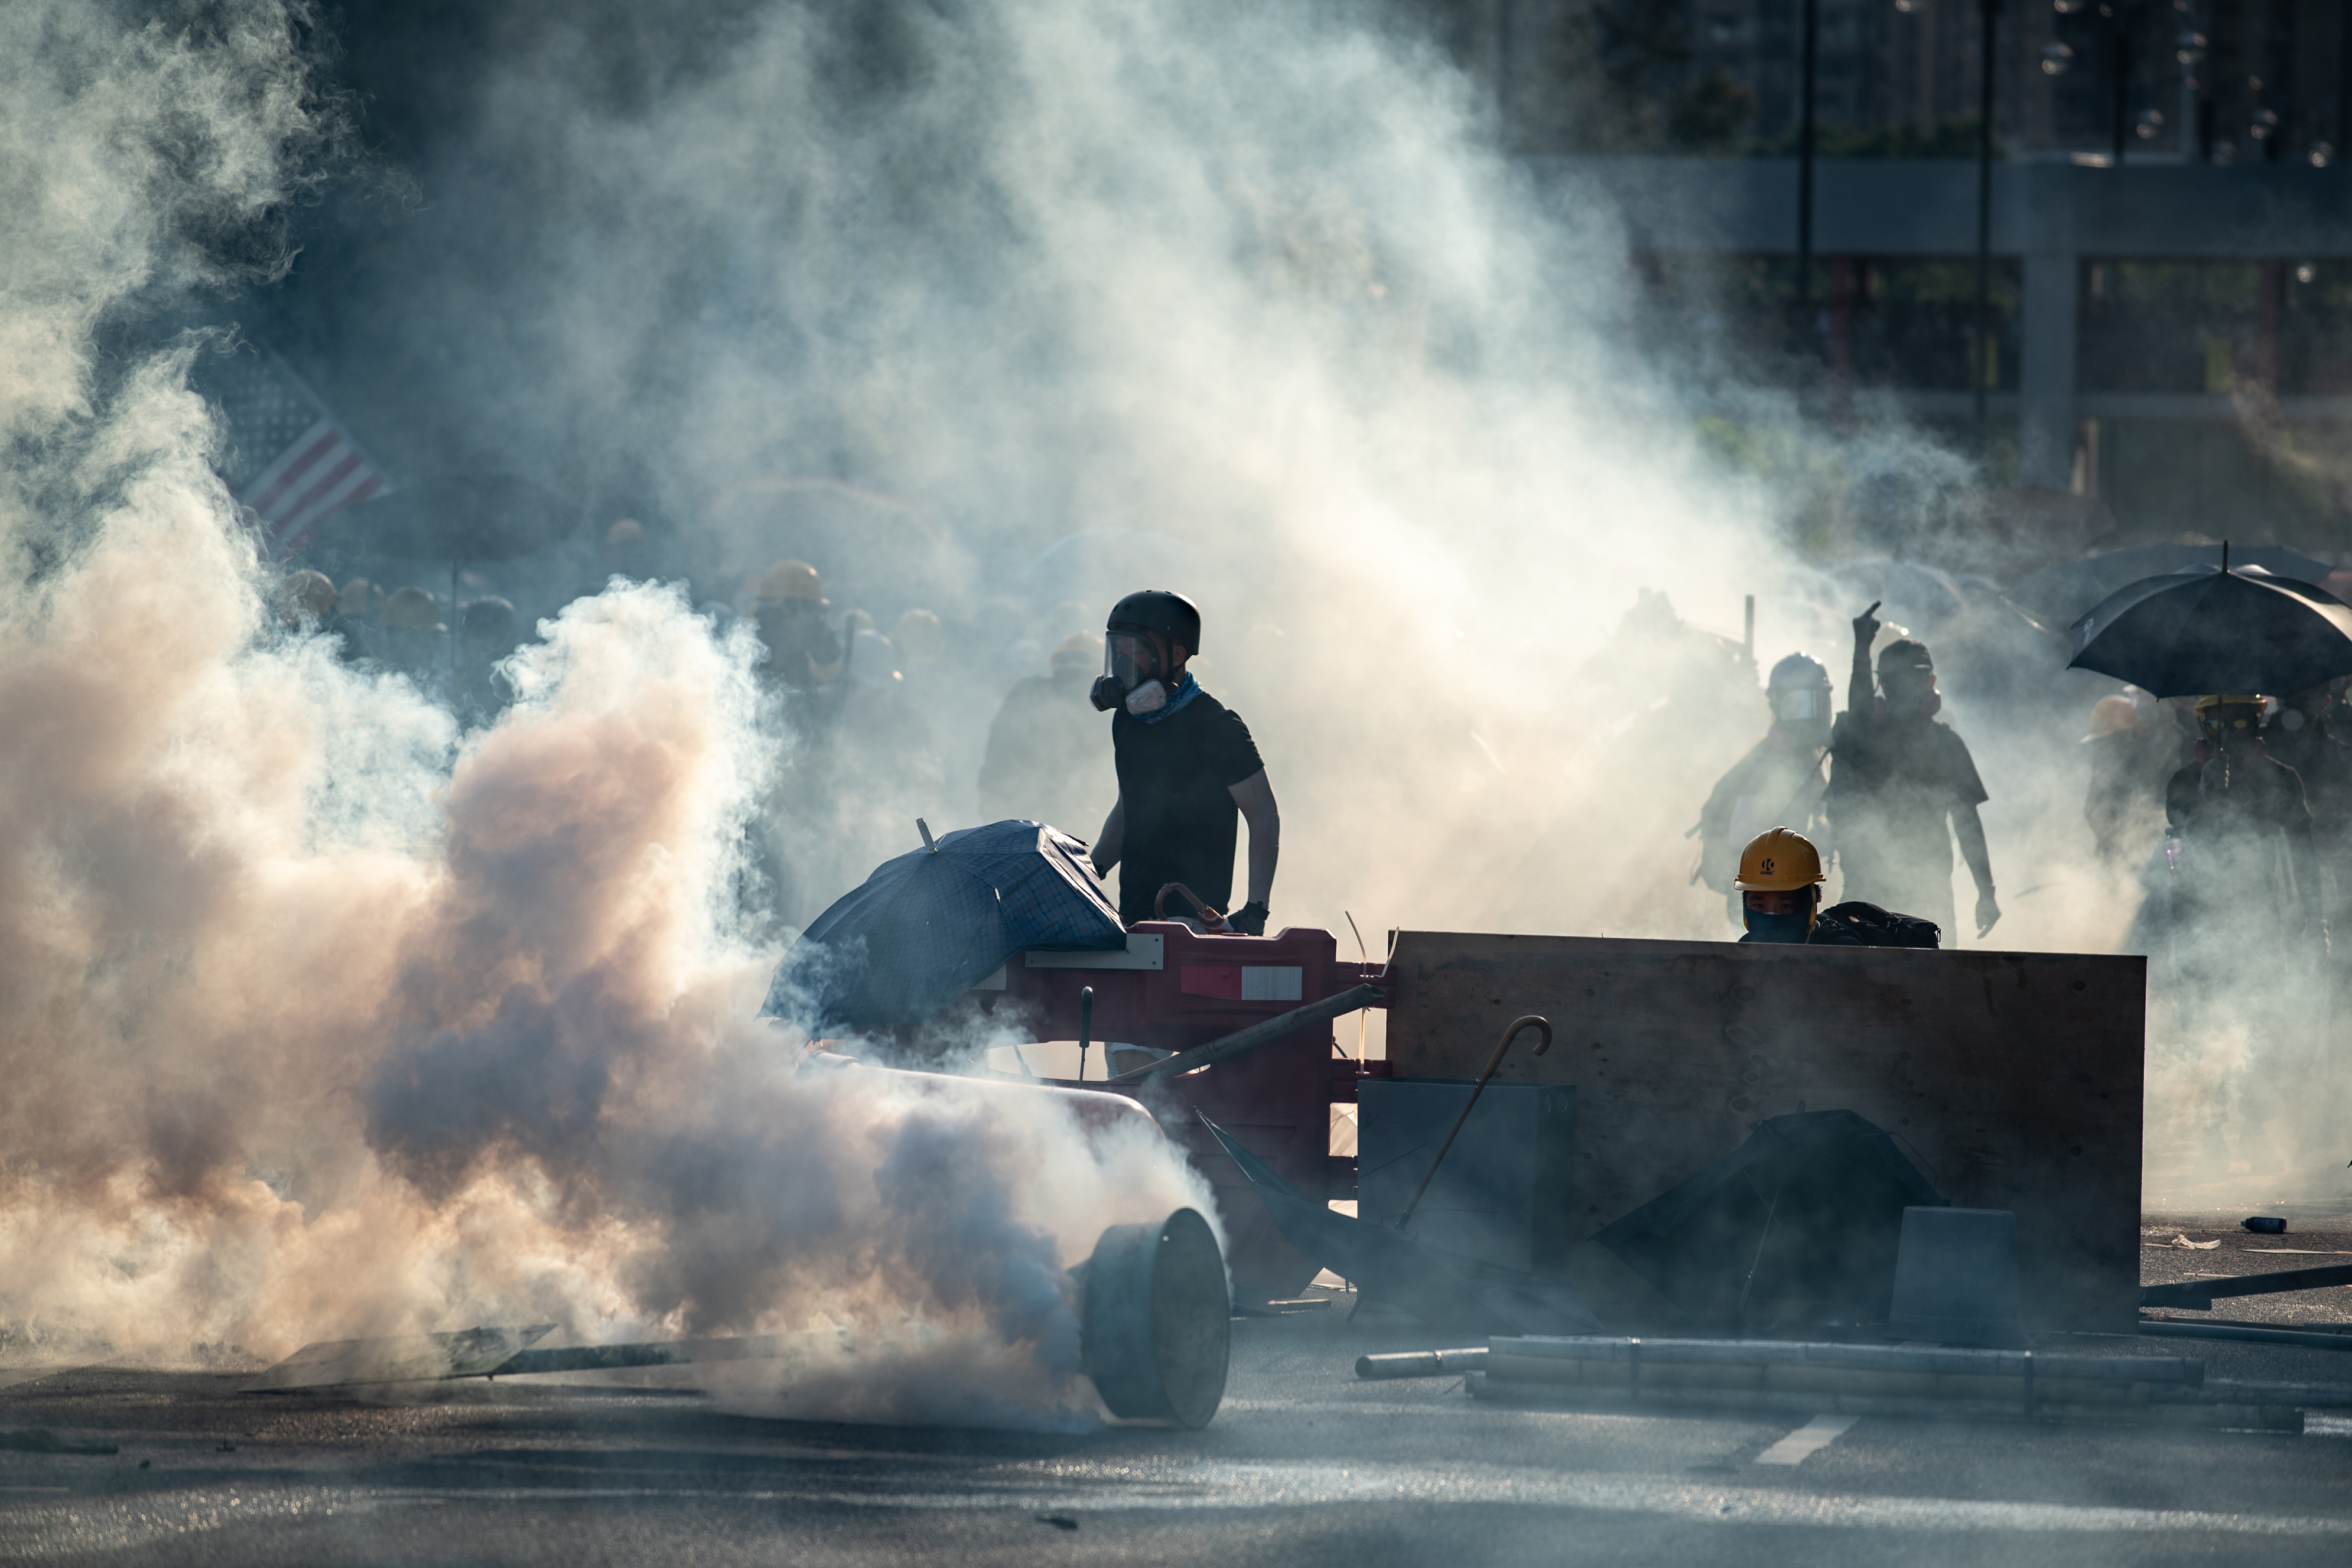 Protesters hold their ground after police fired tear gas in Tai Po district on August 5, 2019.